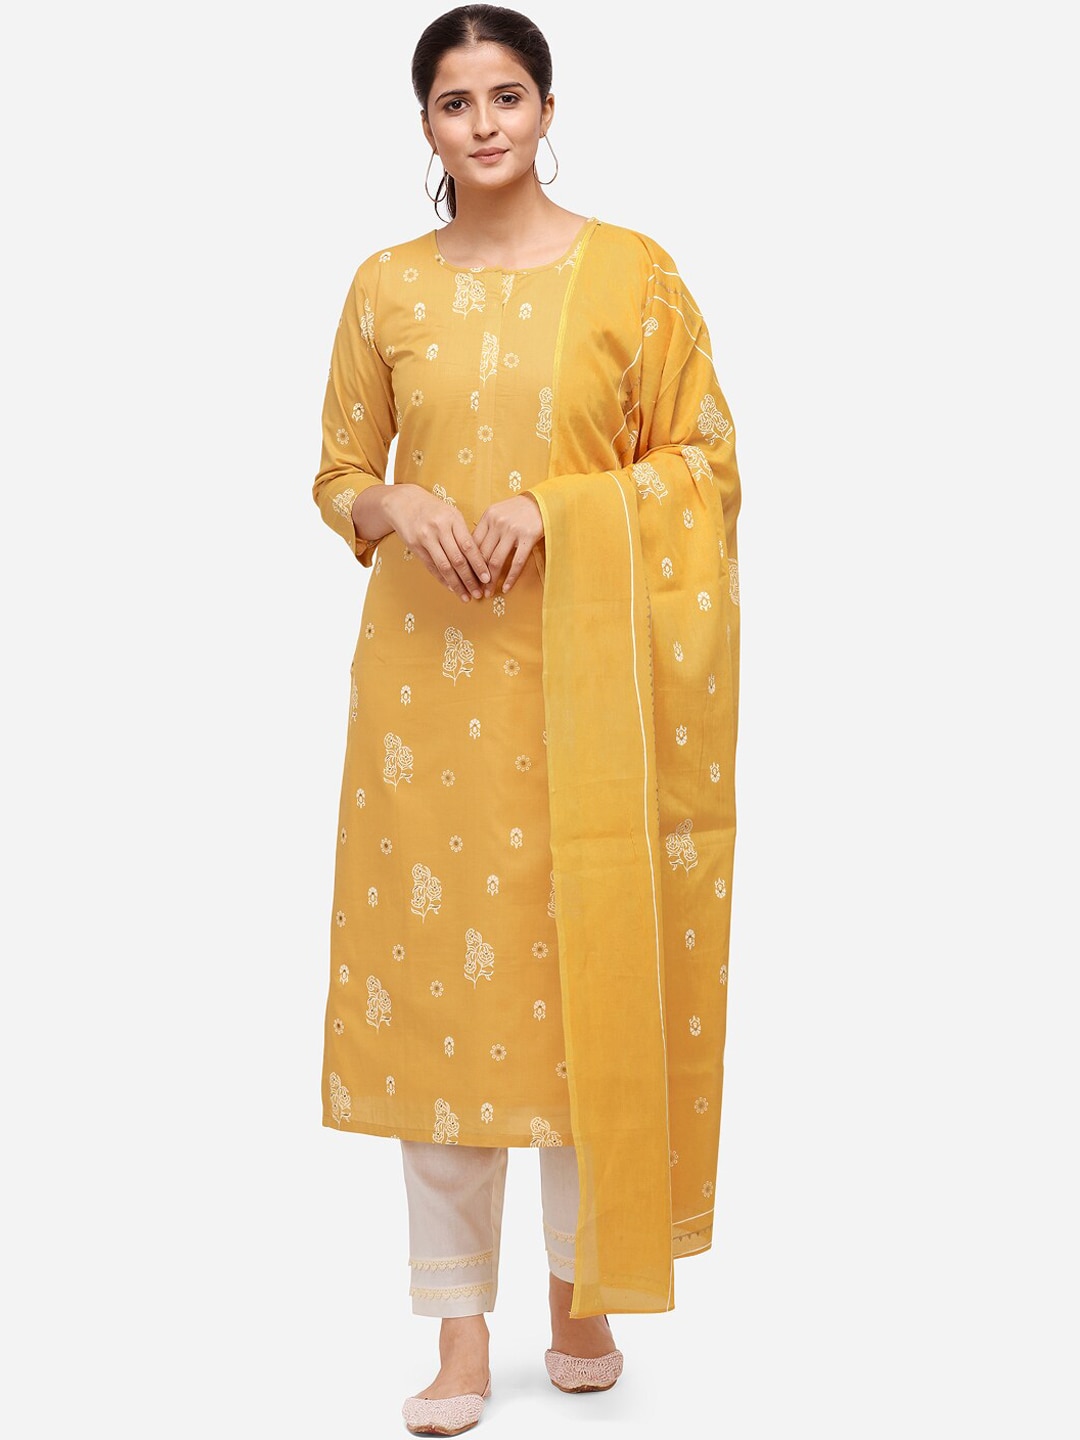 Kvsfab Mustard Yellow & Off-White Cotton Blend Unstitched Dress Material Price in India